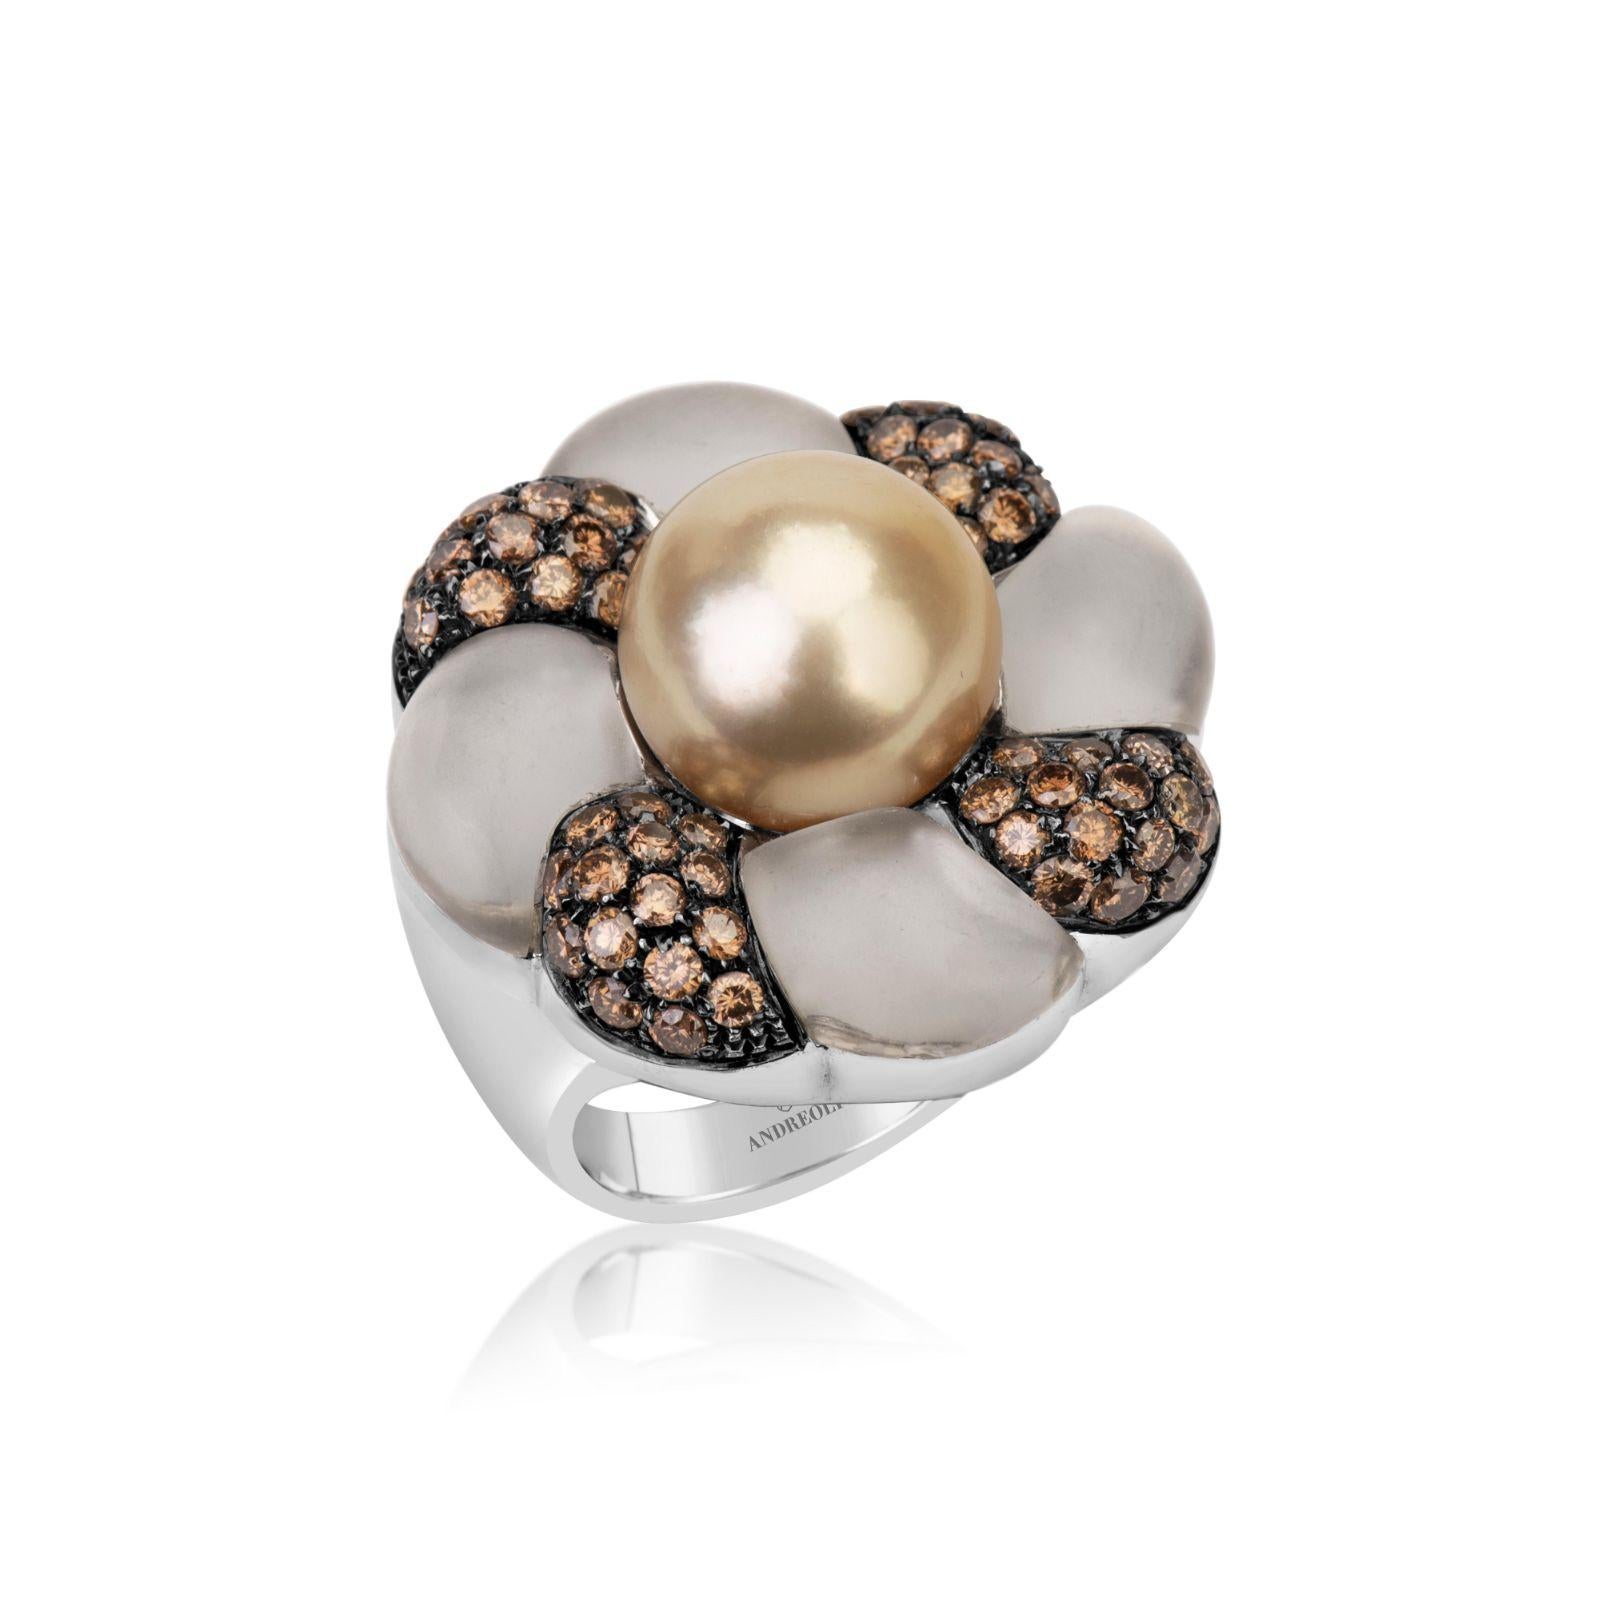 Andreoli Brown Diamond Rock Crystal Golden Pearl 18 Karat Yellow Gold Ring

This ring features:
- 2.00 Carat Brown Diamond
- Rock Crystal
- Golden Pearl
- 22.00 Gram 18K Yellow Gold
- Made In Italy